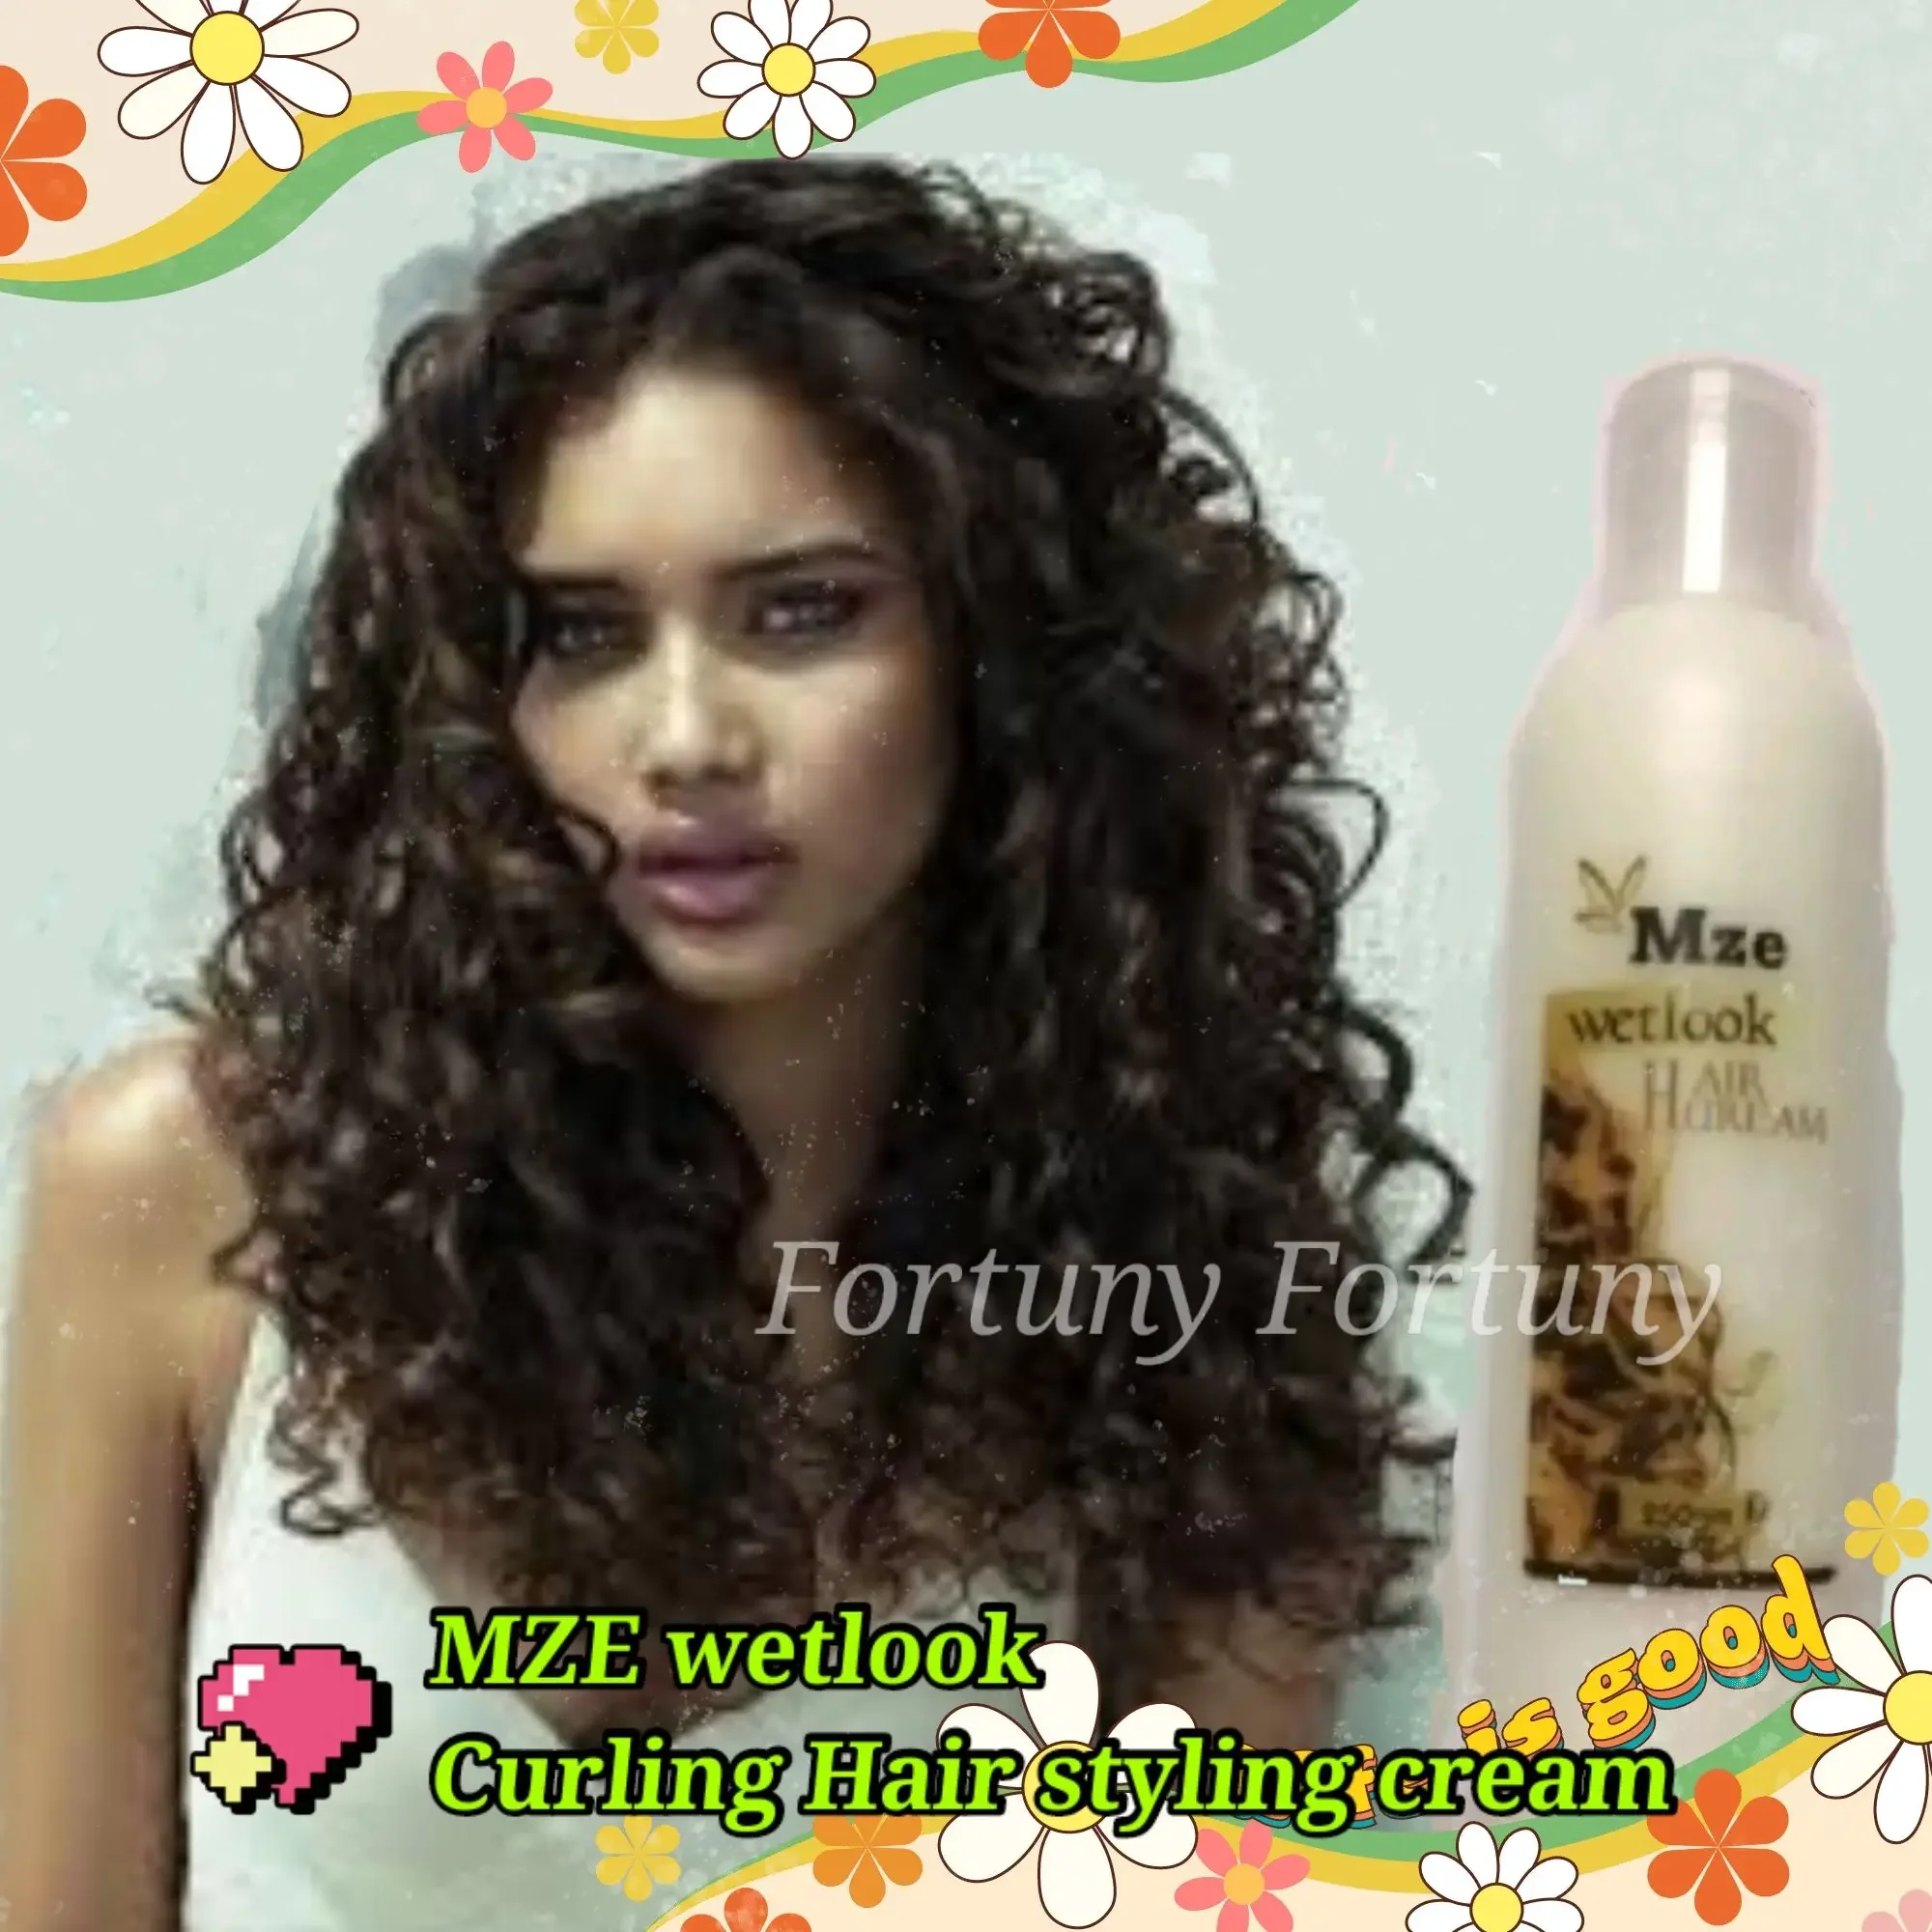 MZE Wet look Moisture & Curling Hair Styling cream 250ml ( NON greasy & Natural hold )